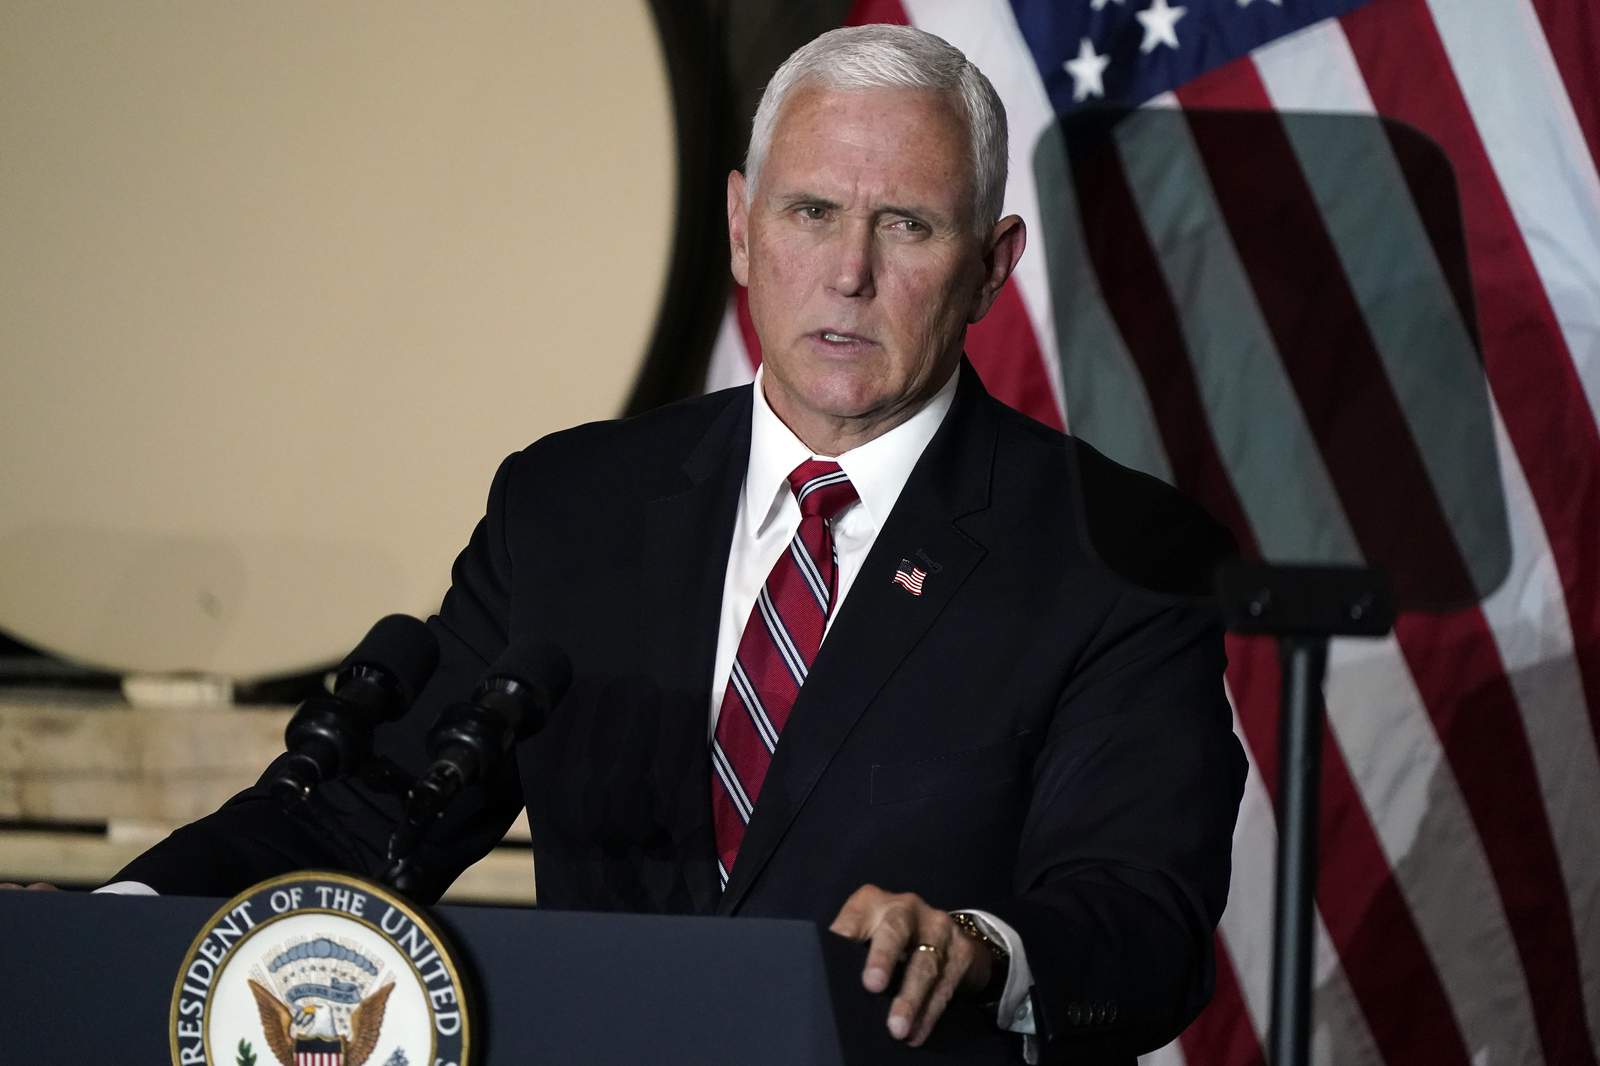 Vice President Mike Pence to host campaign event in Grand Rapids Wednesday